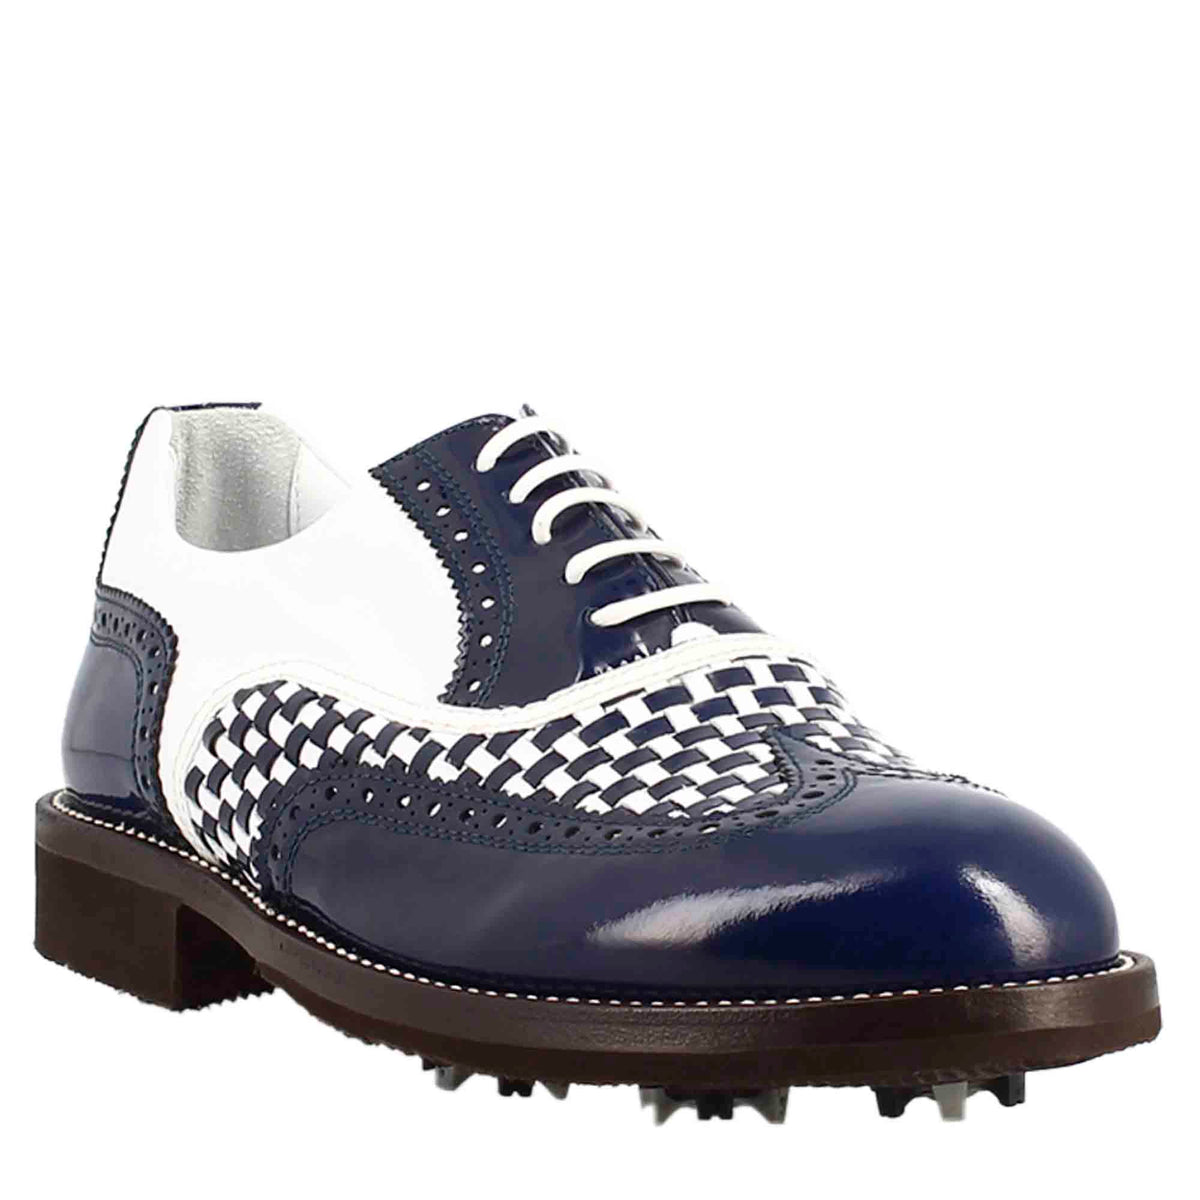 Men's blue and white brogue details handcrafted leather golf shoes